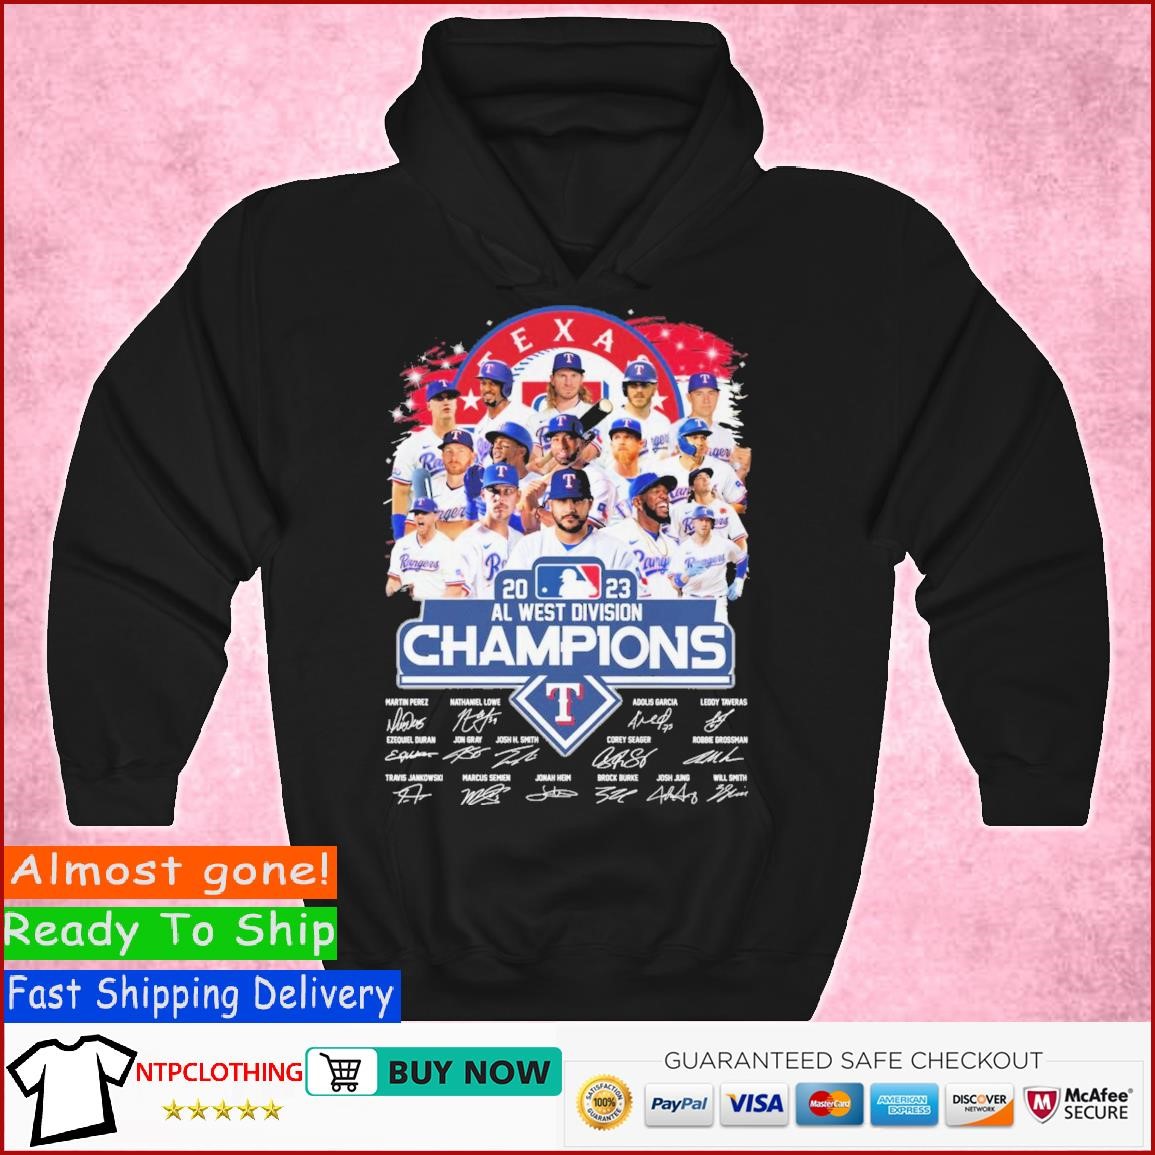 Official 2013 al west division champions Texas rangers shirt, hoodie,  sweatshirt for men and women